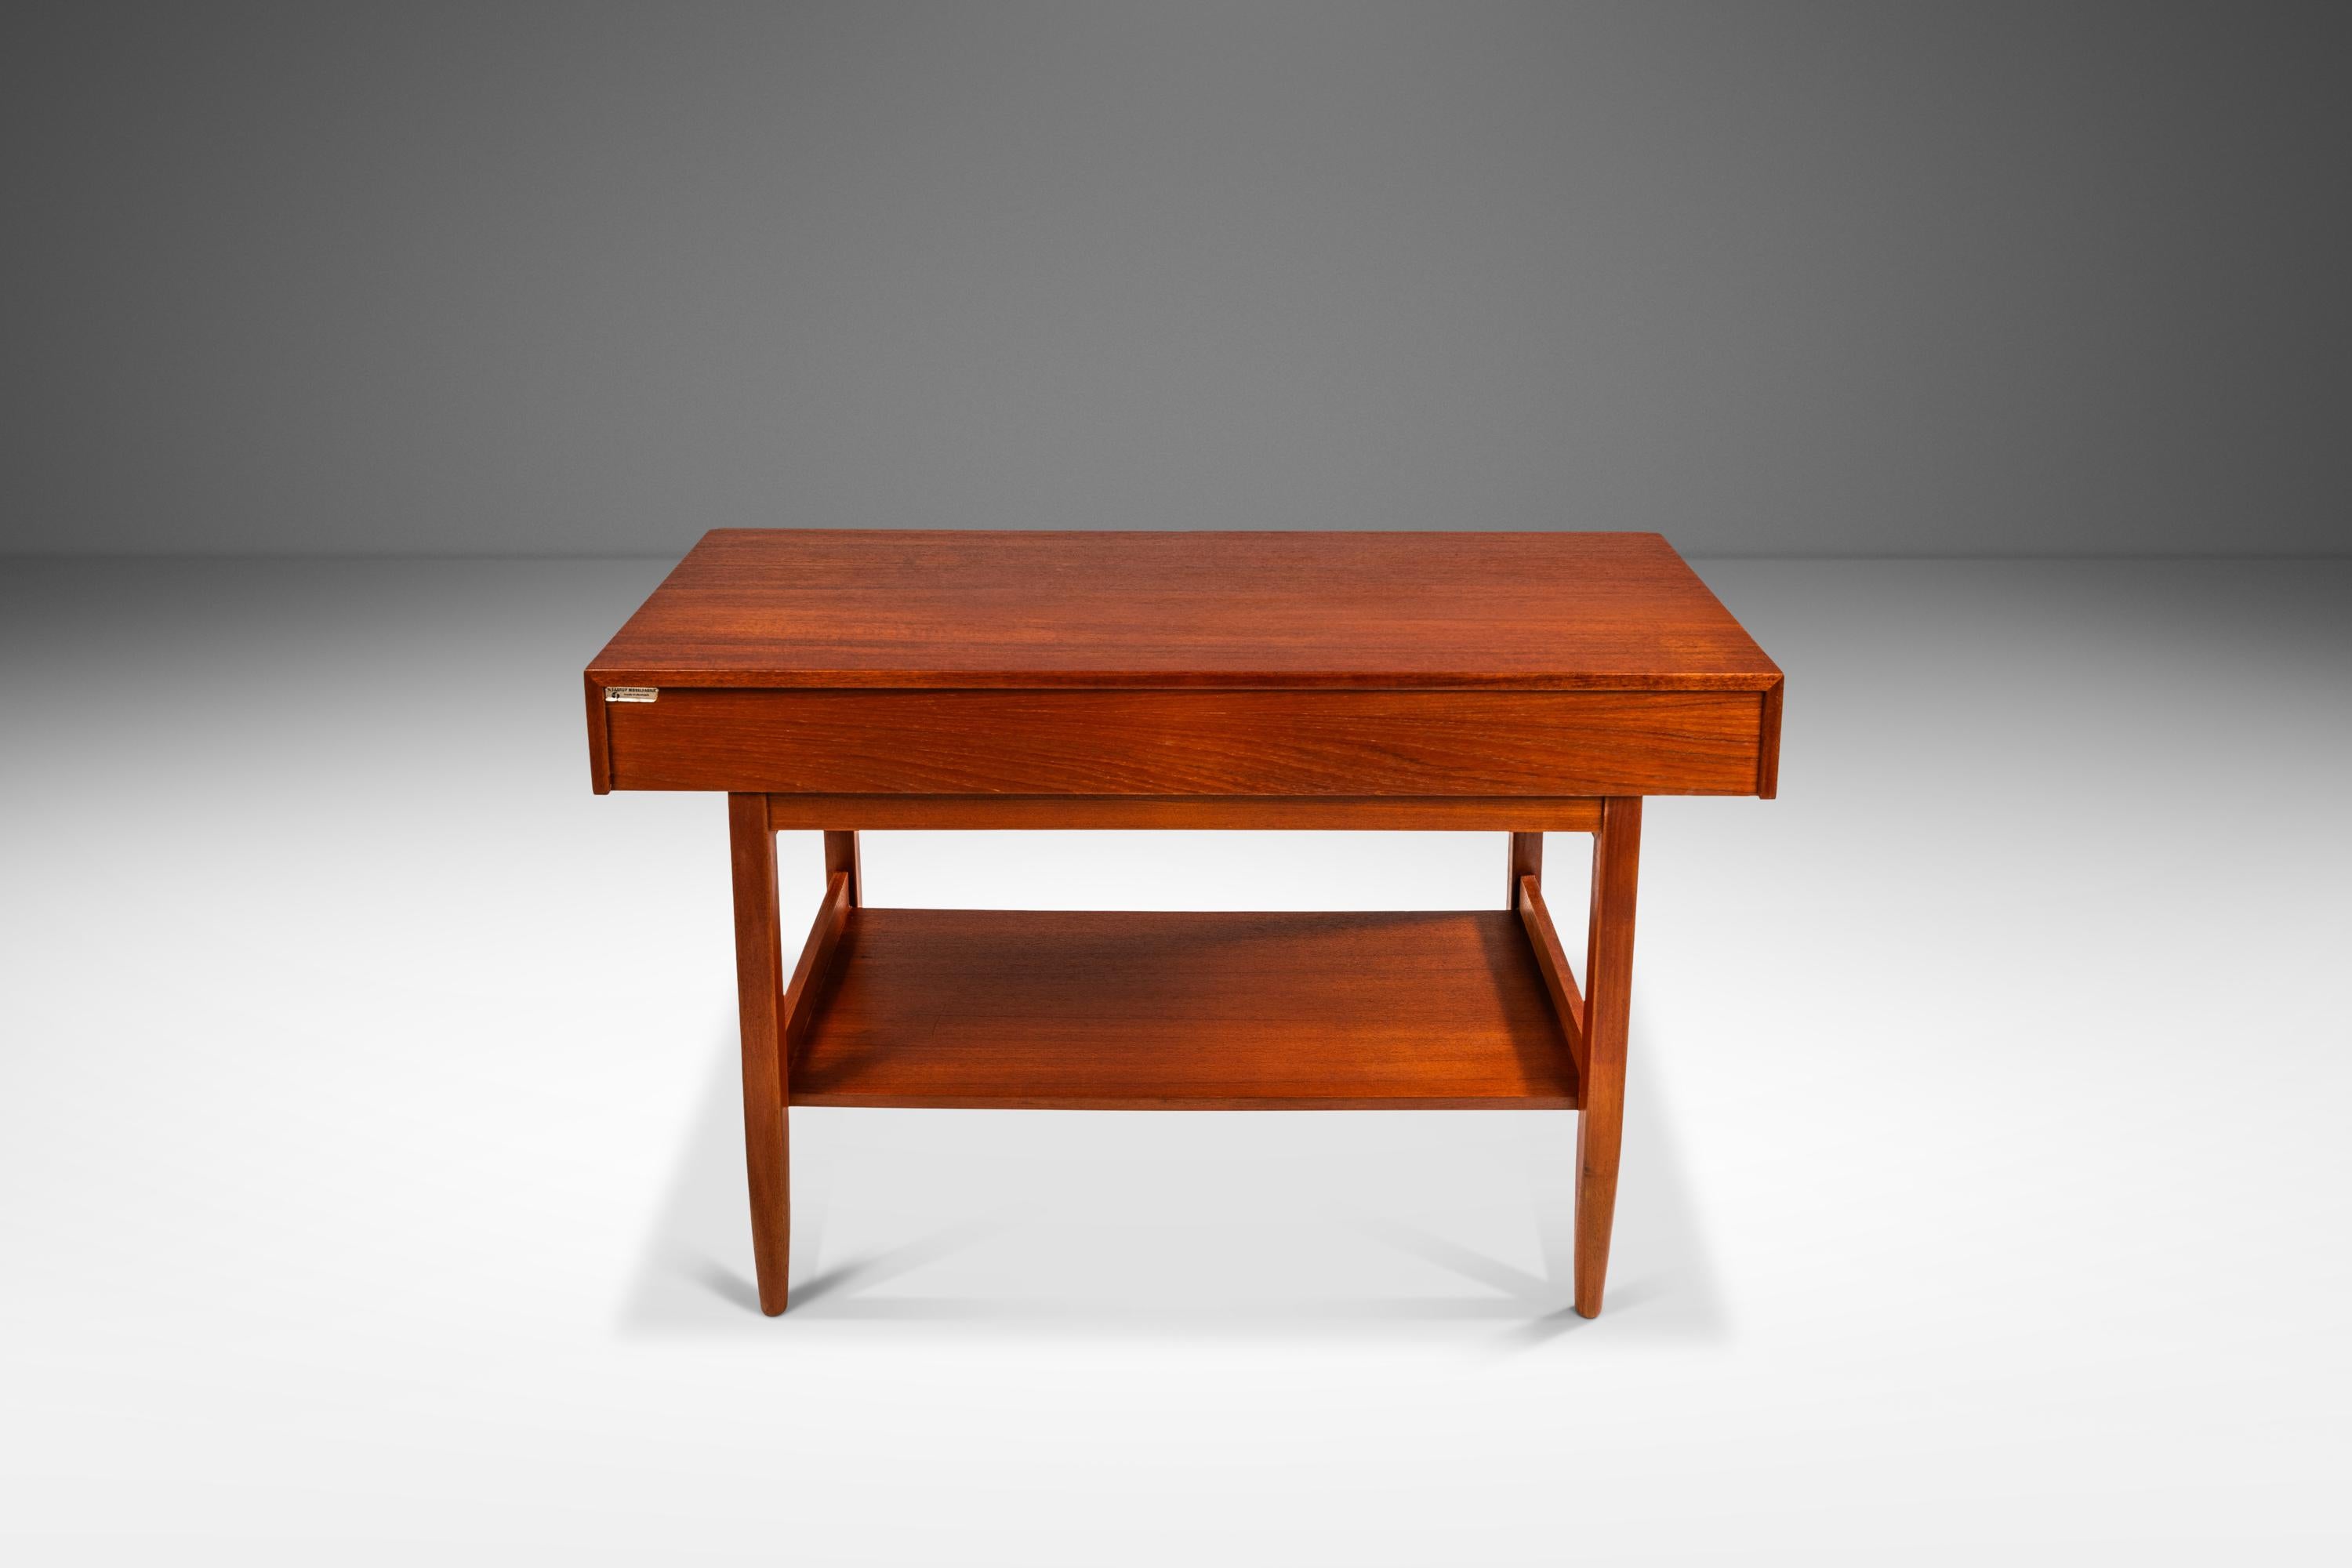 Teak Danish Modern Console Table by Ib Kofod Larsen for Faarup Møbelfabrik, 1960 In Good Condition For Sale In Deland, FL